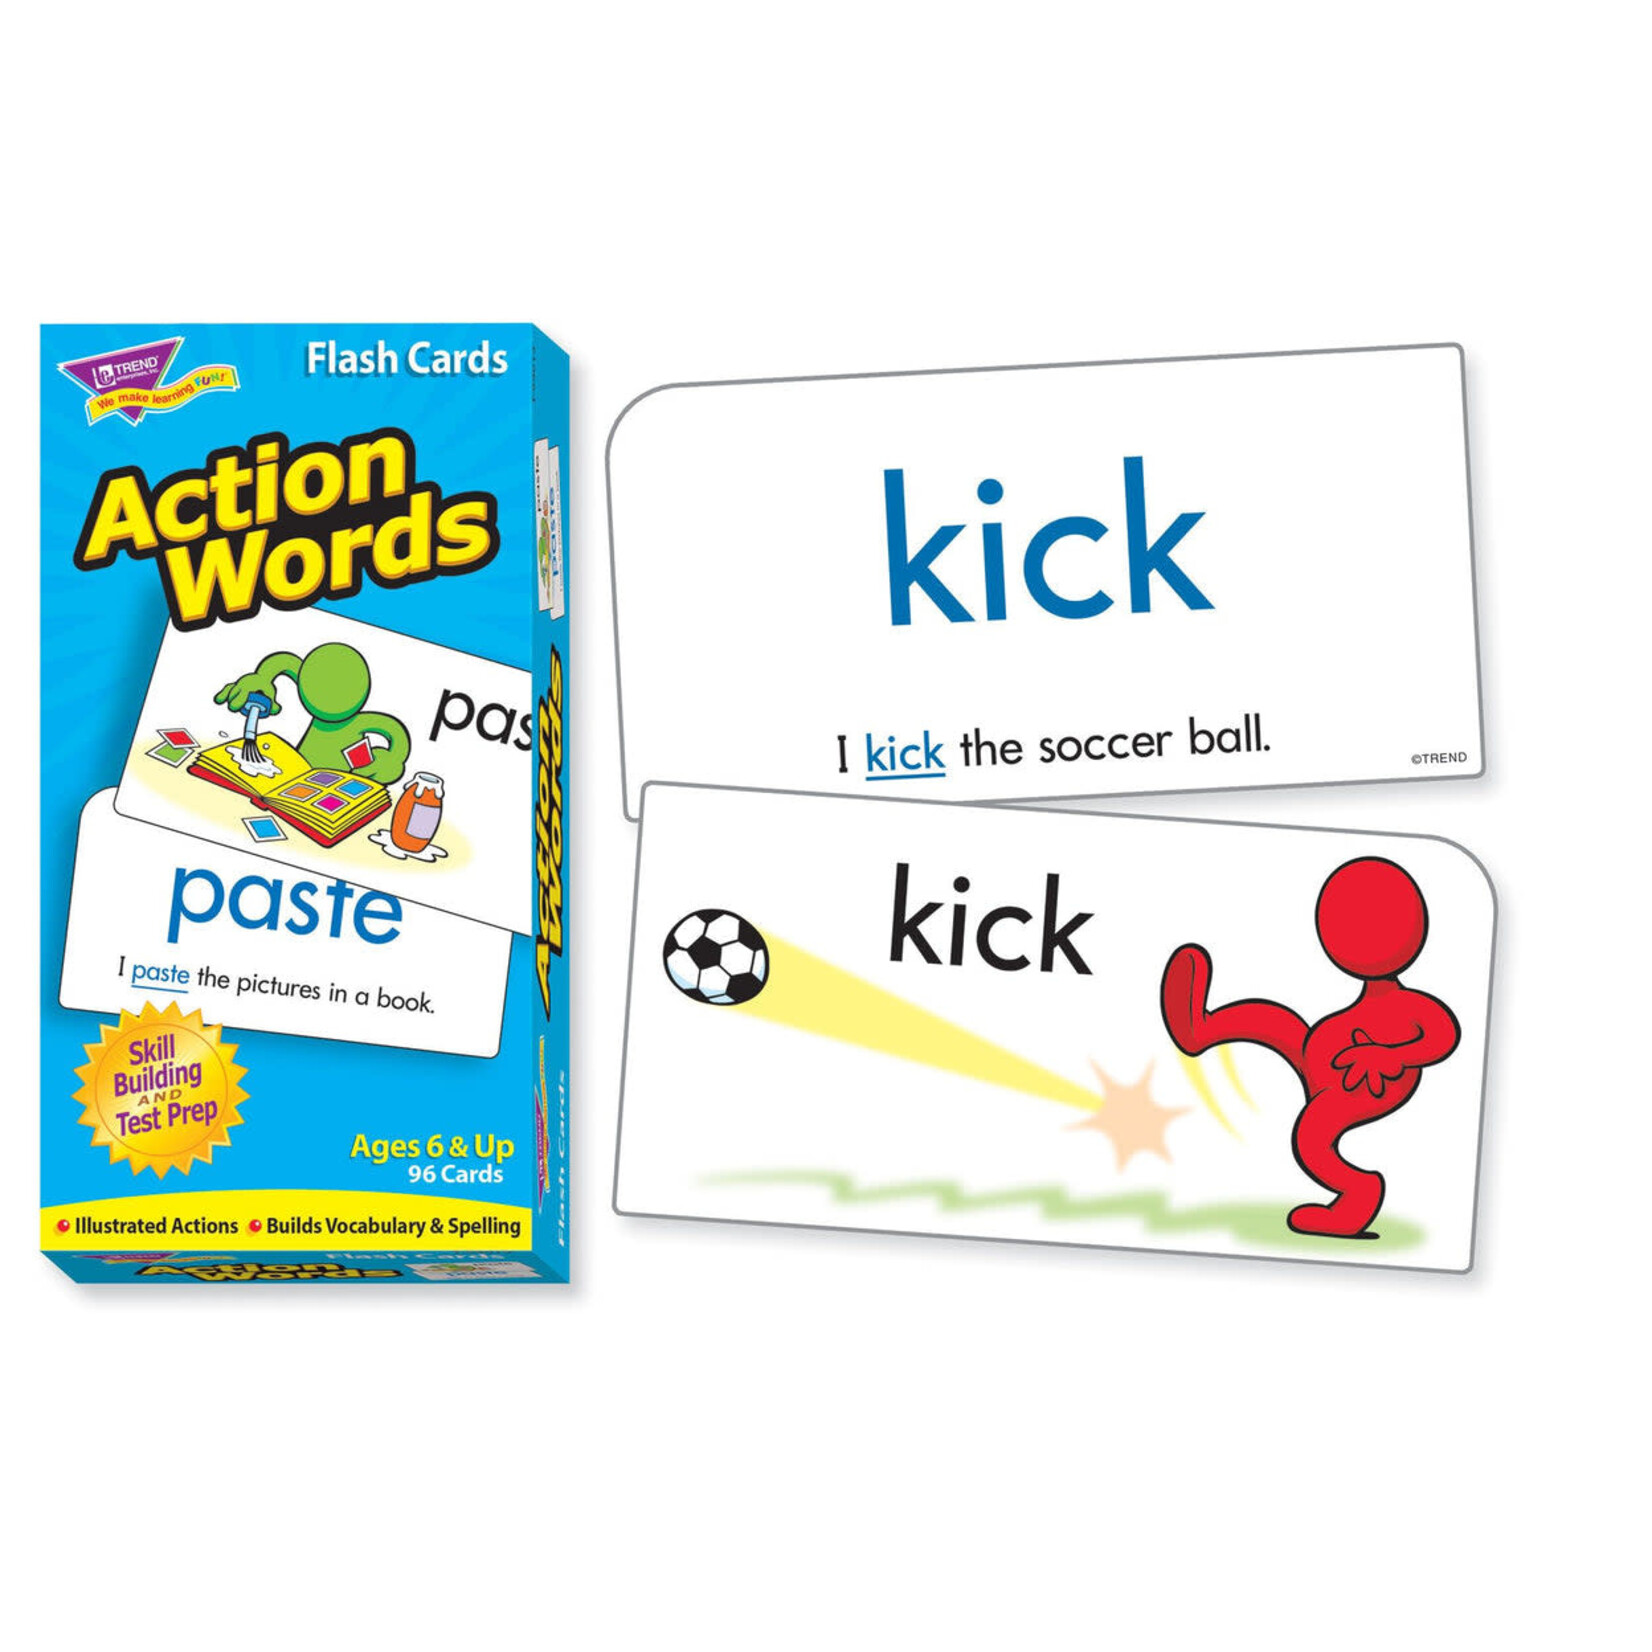 TREND ENTERPRISES INC Action Words Skill Drill Flash Cards